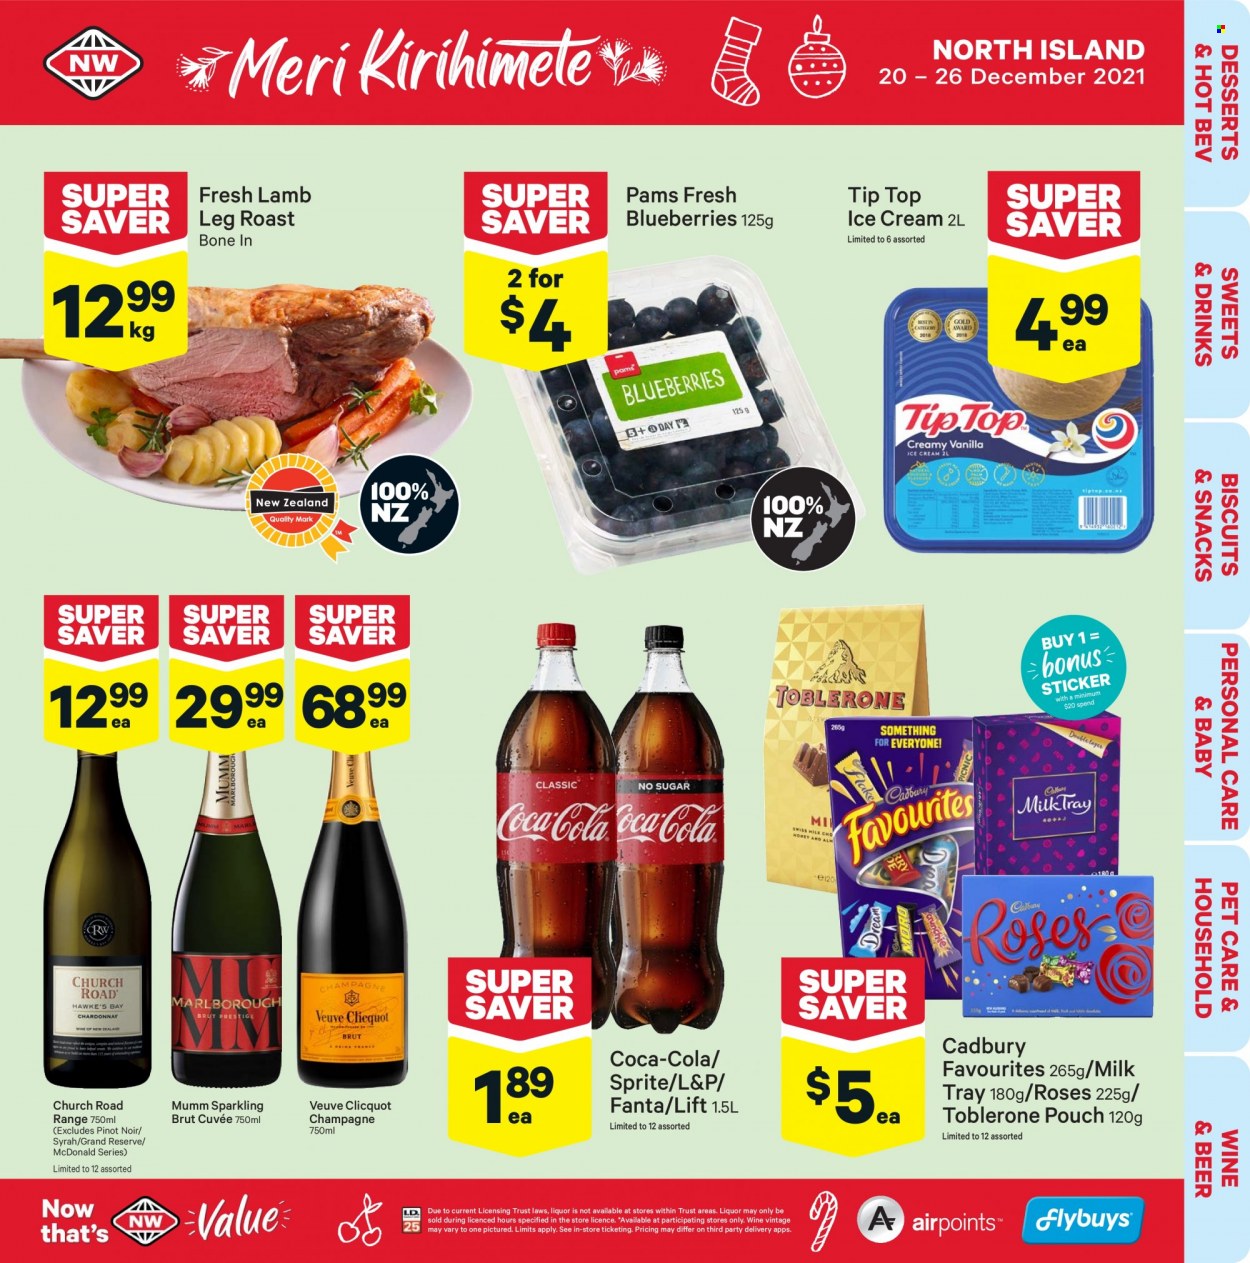 thumbnail - New World mailer - 20.12.2021 - 26.12.2021 - Sales products - Tip Top, blueberries, ice cream, snack, biscuit, Toblerone, Milk Tray, Cadbury, Coca-Cola, Sprite, Fanta, L&P, red wine, sparkling wine, champagne, wine, Pinot Noir, Cuvée, Veuve Clicquot, Syrah, beer, lamb meat, lamb leg. Page 1.